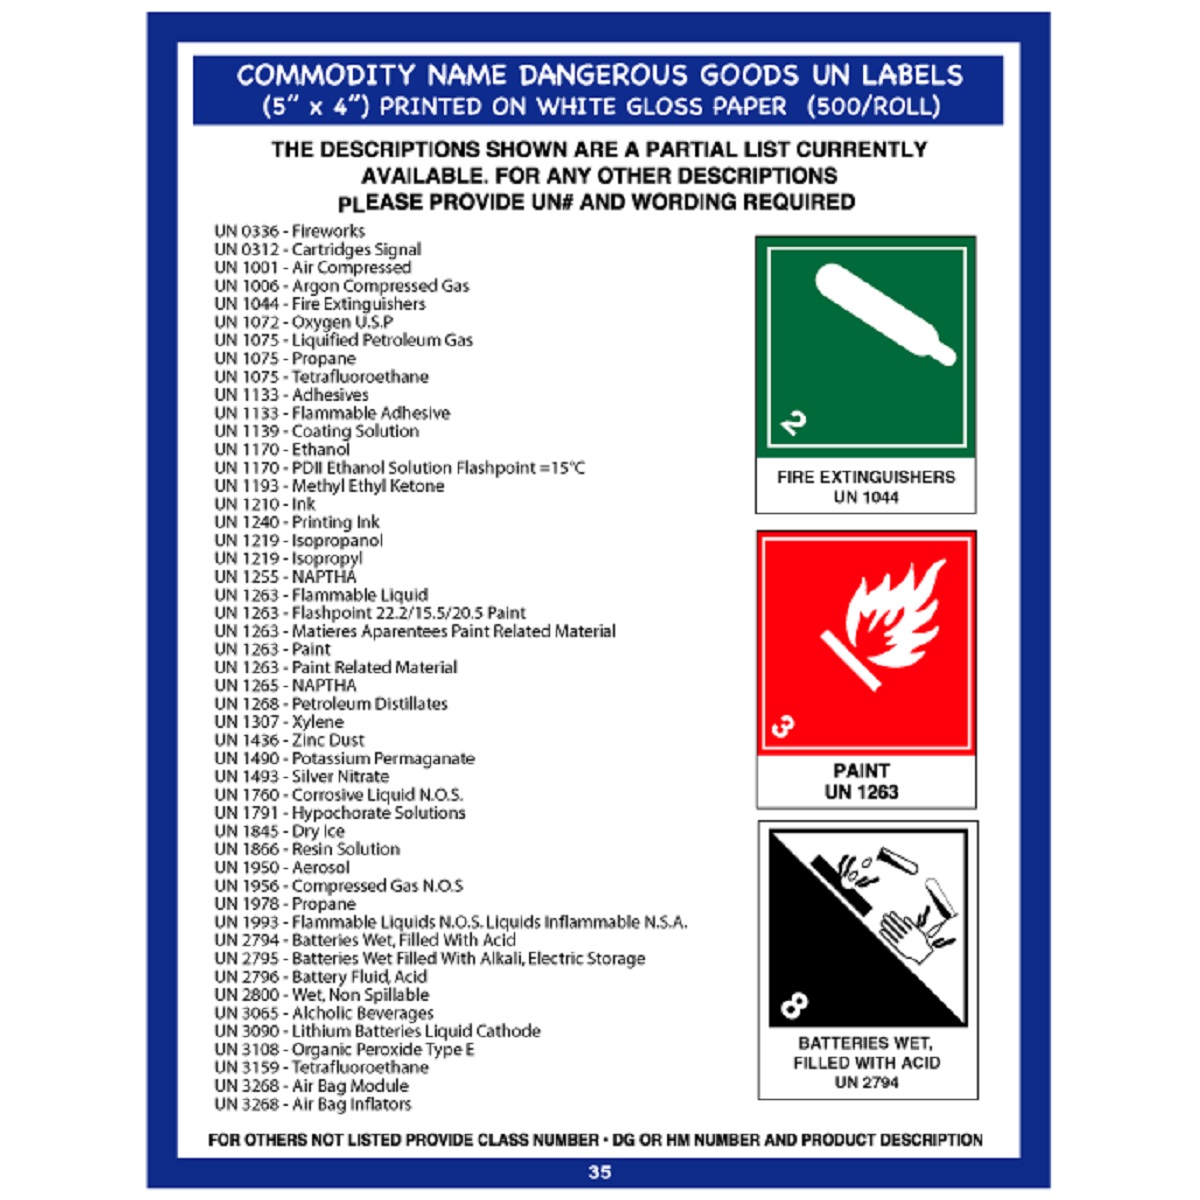 Commodity Name Dangerous Goods Labels - 4